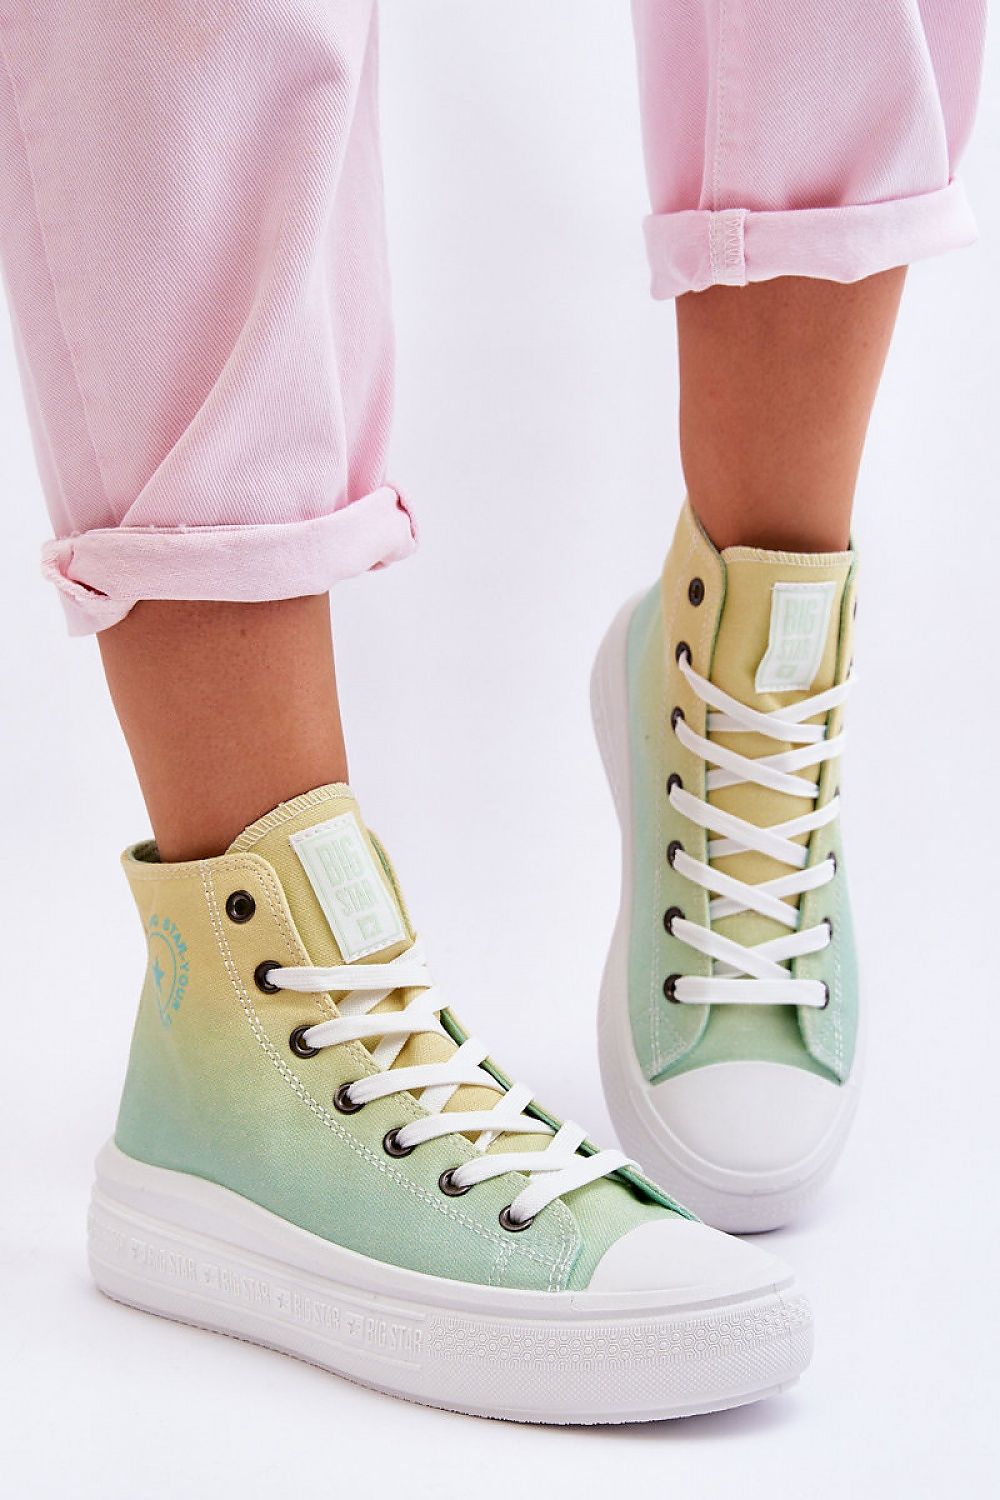 TEEK - Ombre Laced High-Top Platform Sneakers SHOES TEEK MH Green 36 